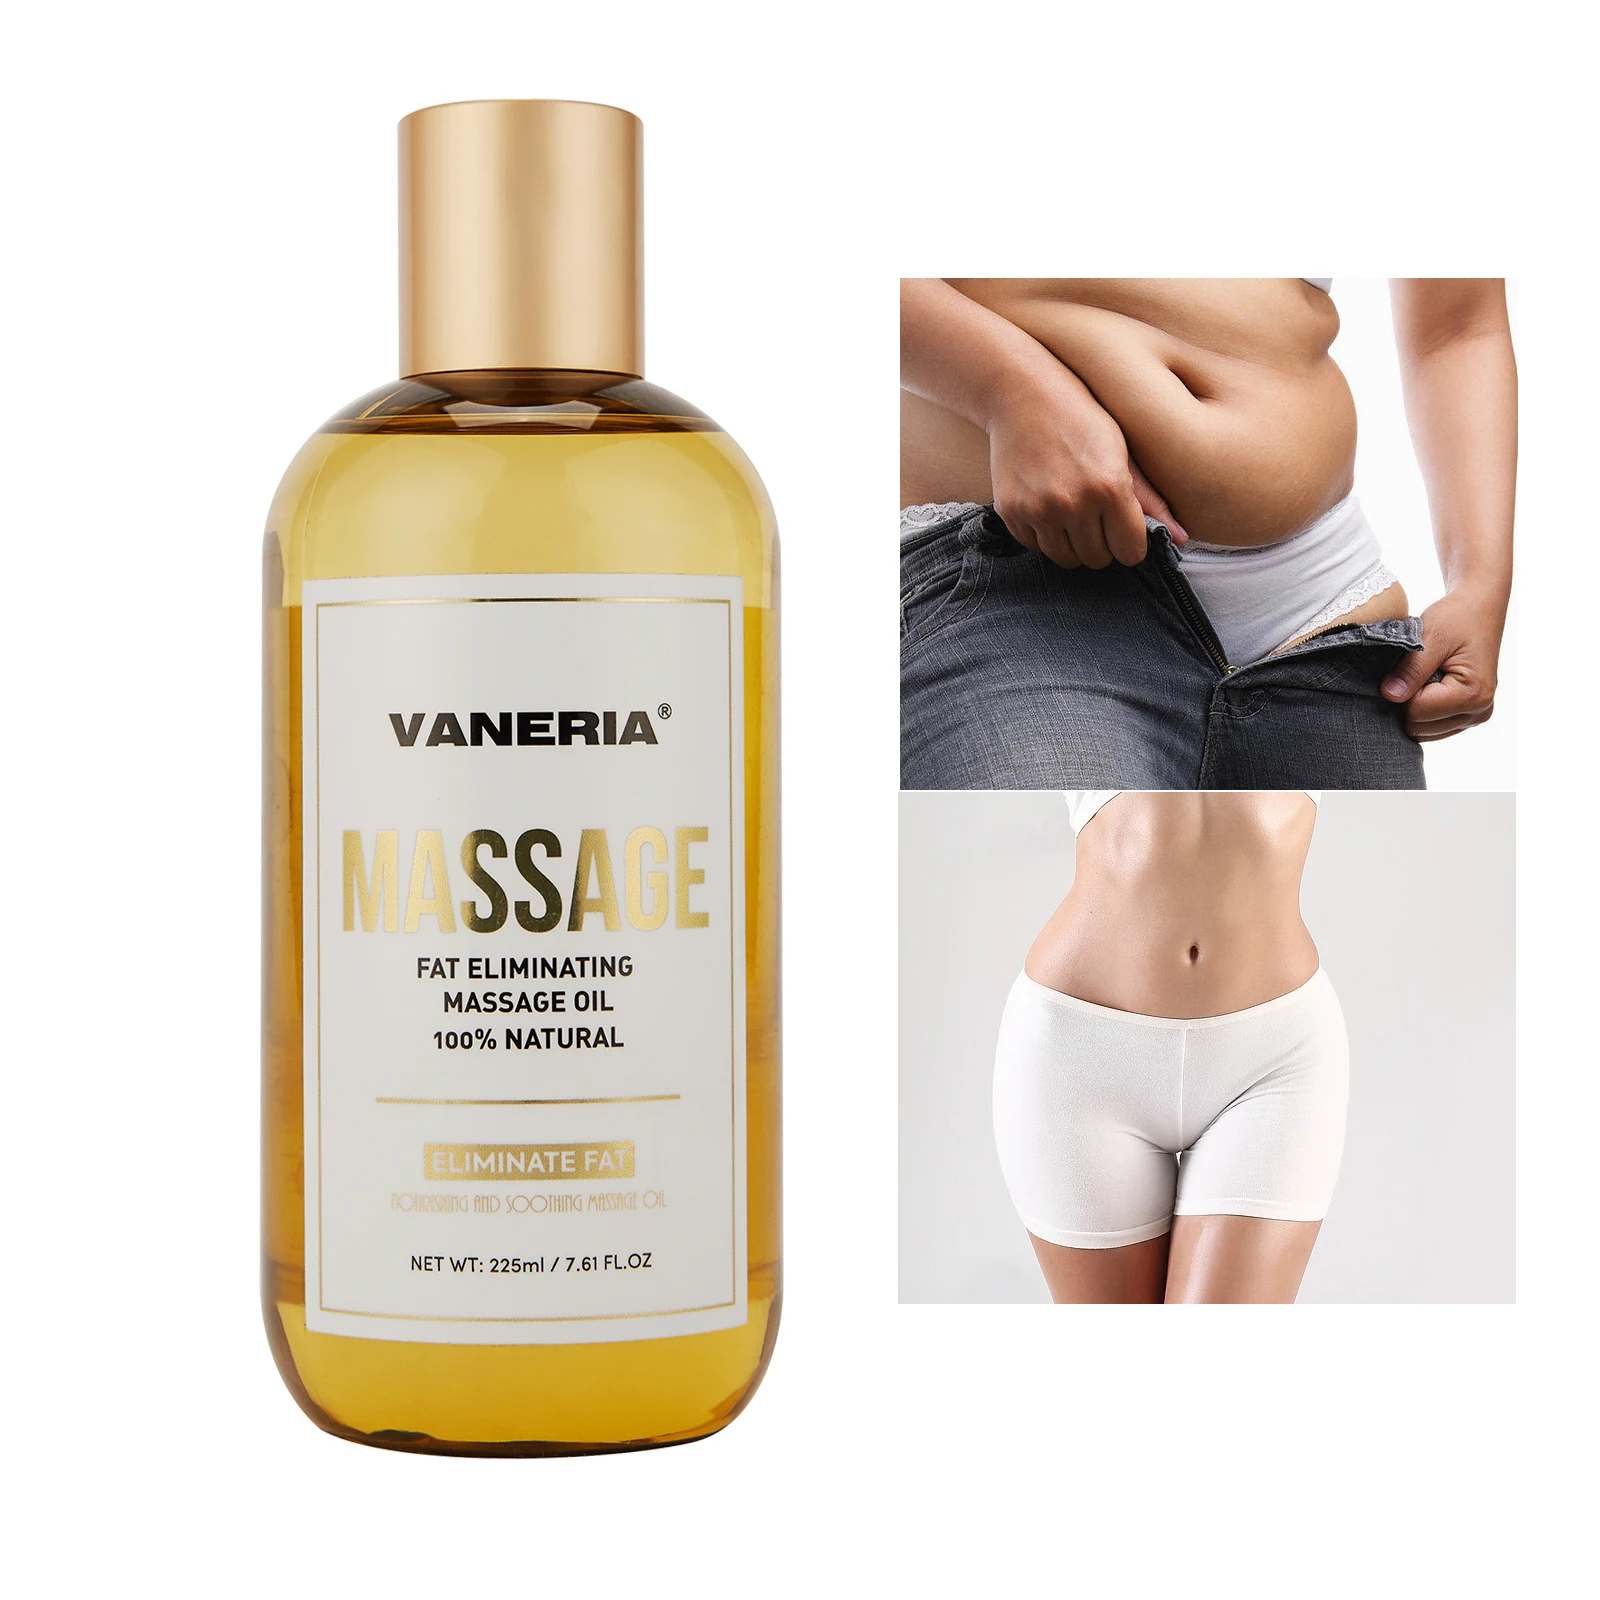 

VANERIA Essential Oil Slimming Body Massage Oil Weight Loss Anti Cellulite Organic Herbal Slimming Oil Fat Burning